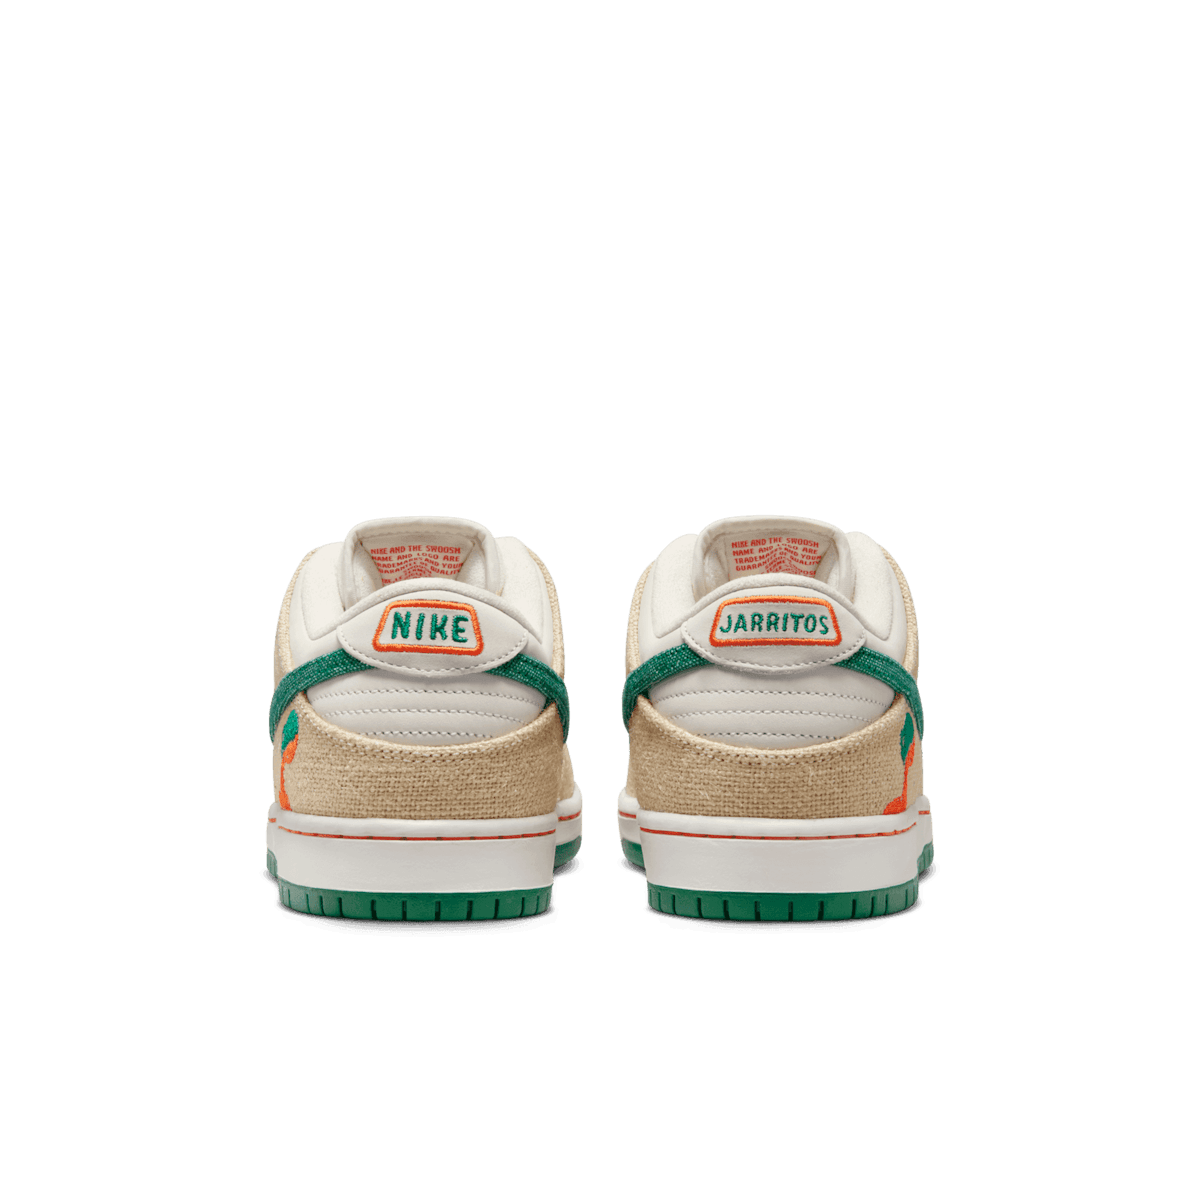 Here's How to Much the Nike SB Dunk Low x N7 Is Selling For Resale